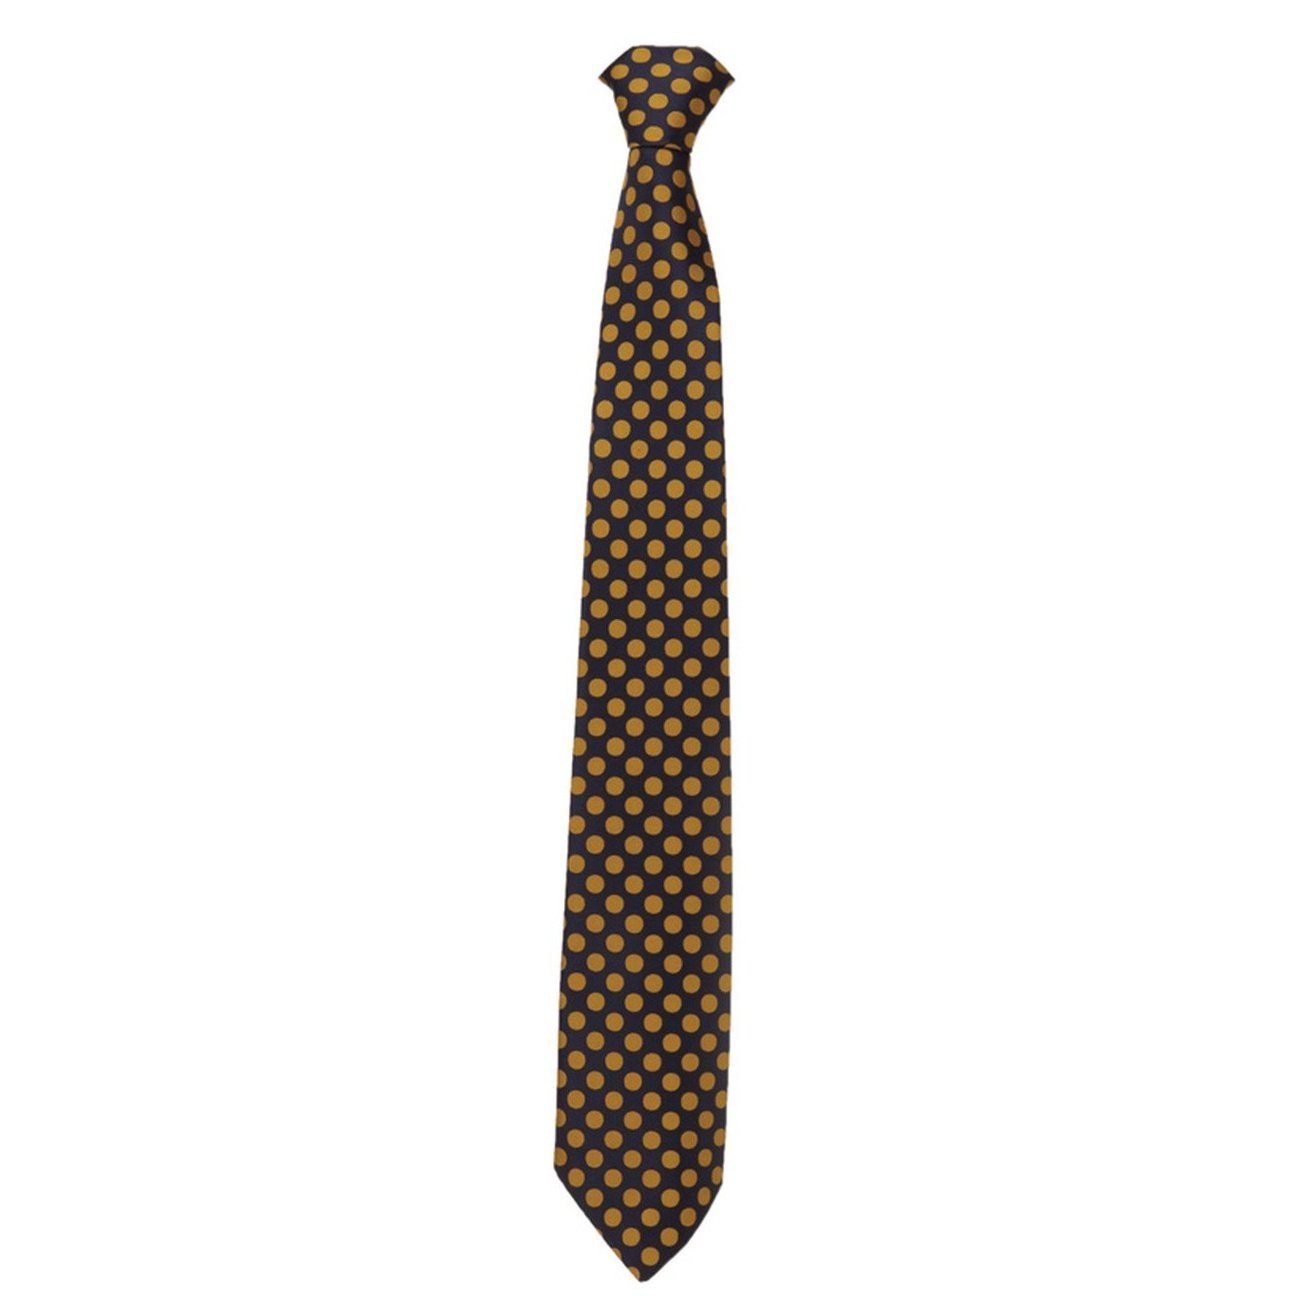 Caldene Small Spot Tie Competition Show Tie Super smart ladies tie with small co 